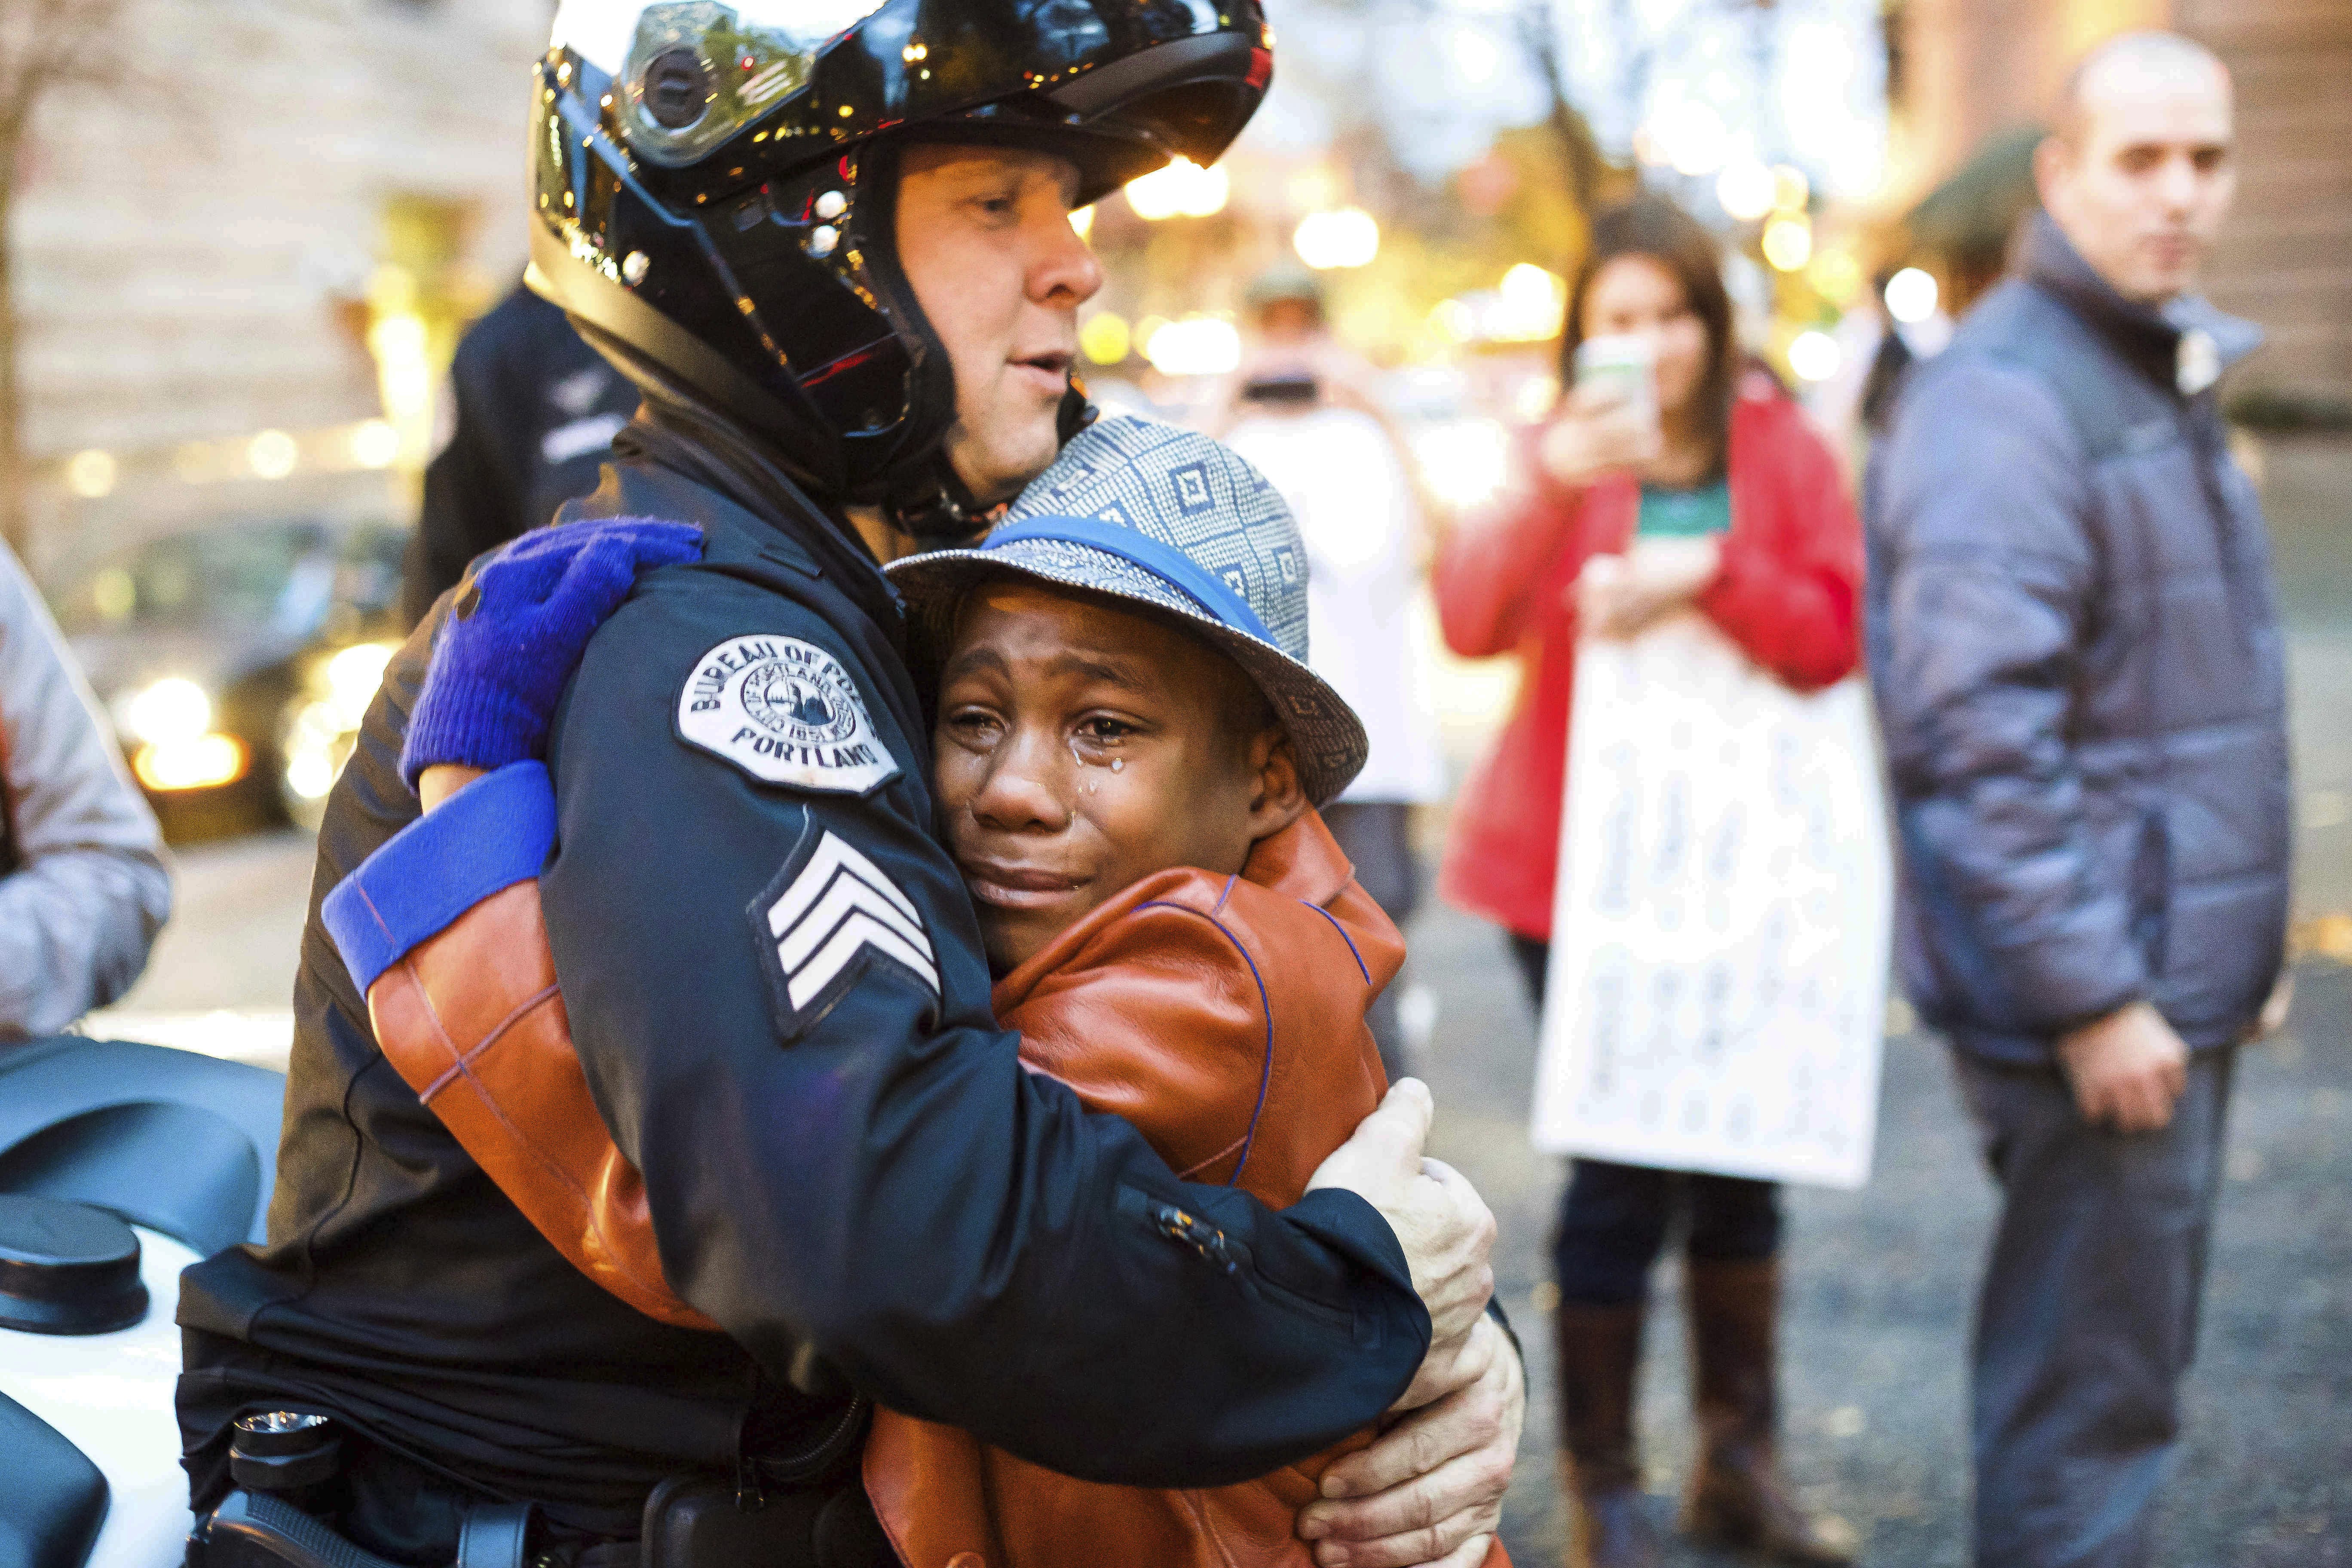 FILE - In this Nov. 25, 2014, file photo provided by Johnny Nguyen, Portland police Sgt. Bret Barnum, left, and Devonte Hart, 12, hug at a rally in Portland, Ore., where people had gathered in support of the protests in Ferguson, Mo. Authorities have said two women and three children were killed Monday, March 26, 2018, when their SUV fell from a cliff along Pacific Coast Highway in Mendocino County. Hart is one of the three other children still missing after the vehicle fell off a cliff. He had gained fame when this picture of him hugging the white police officer during the protest went viral.